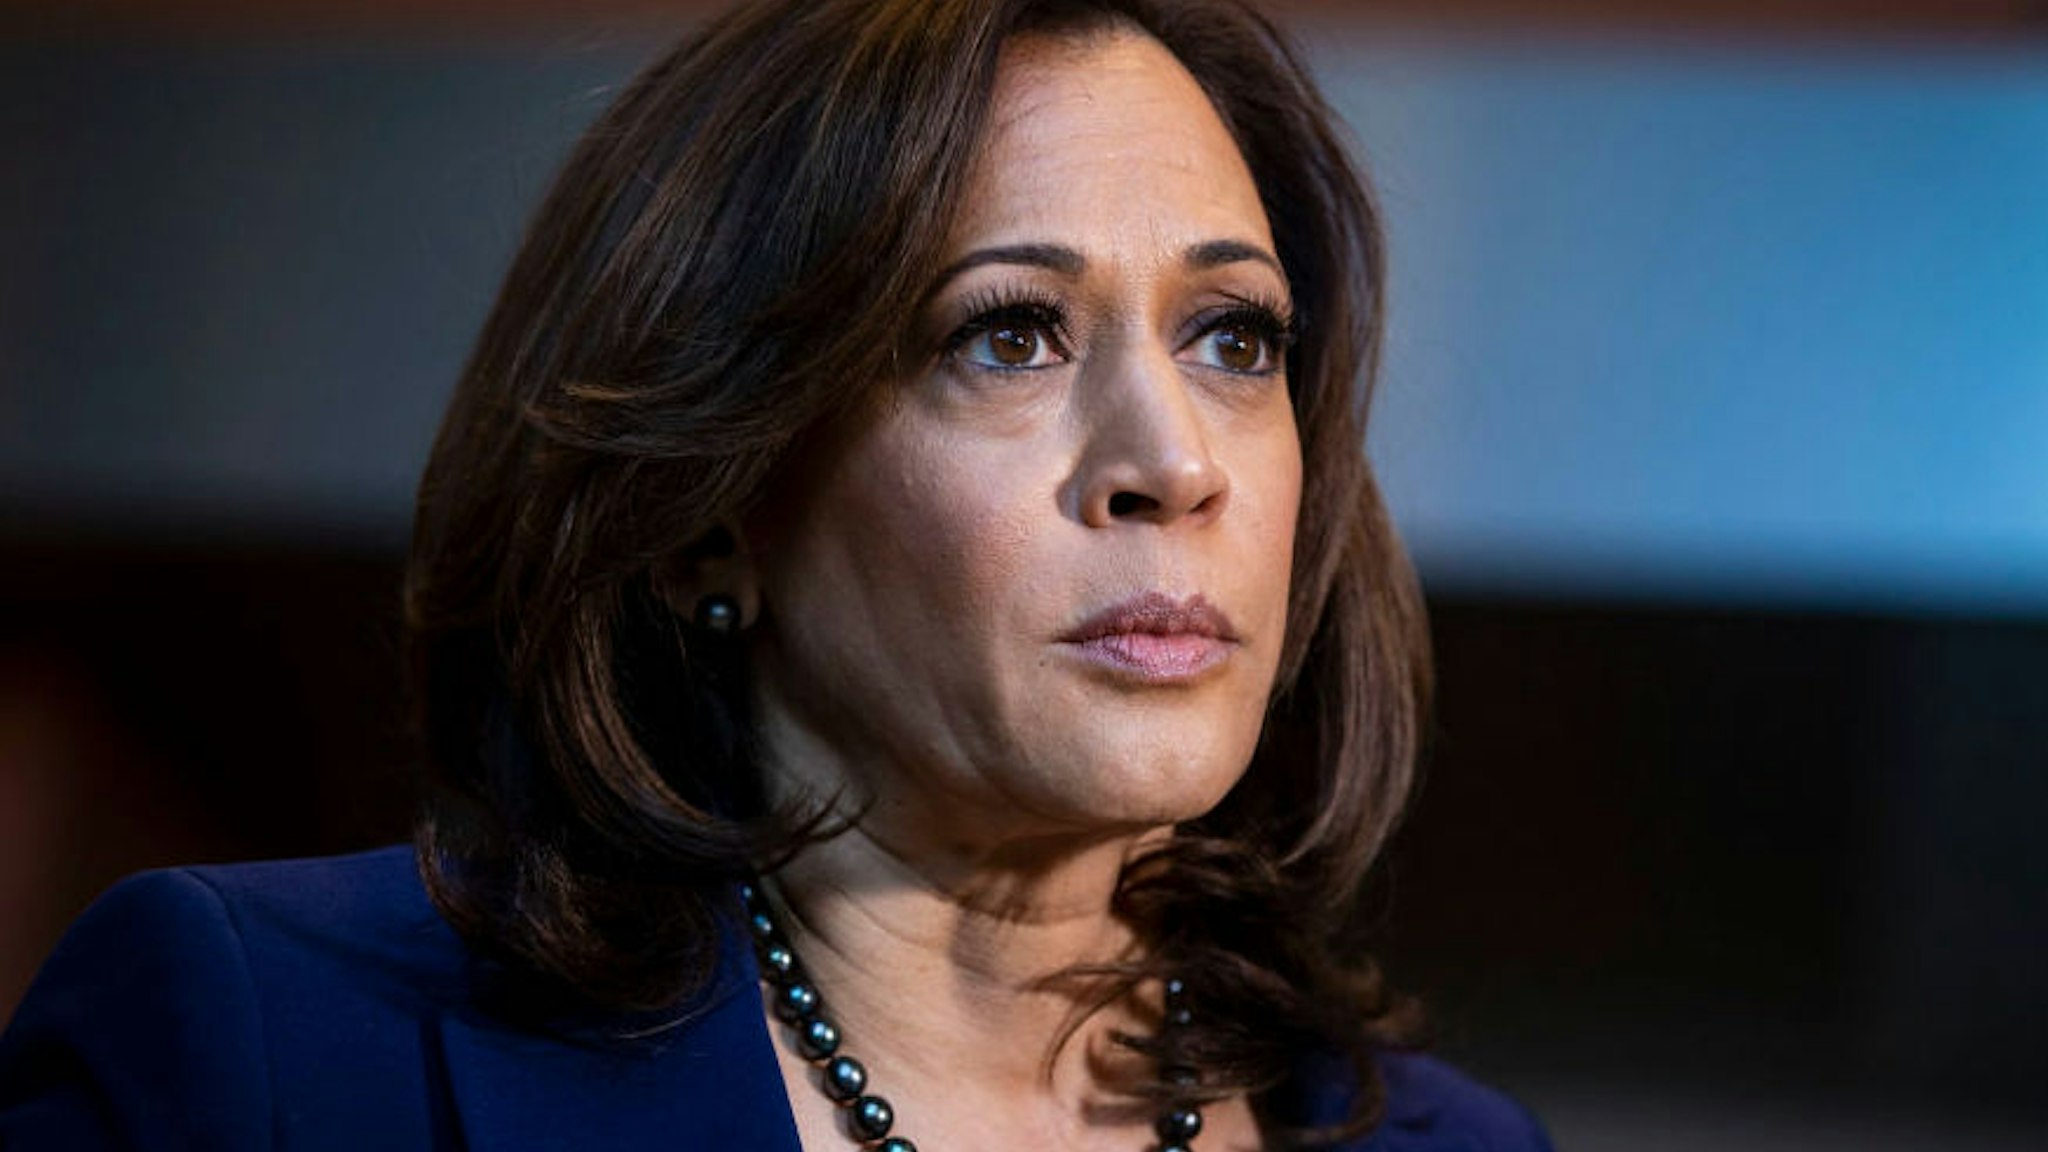 WASHINGTON, DC - JANUARY 21: U.S. Sen. Kamala Harris (D-CA) speaks to reporters after announcing her candidacy for President of the United States, at Howard University, her alma mater, on January 21, 2019 in Washington, DC. Harris is the first African-American woman to announce a run for the White House in 2020.